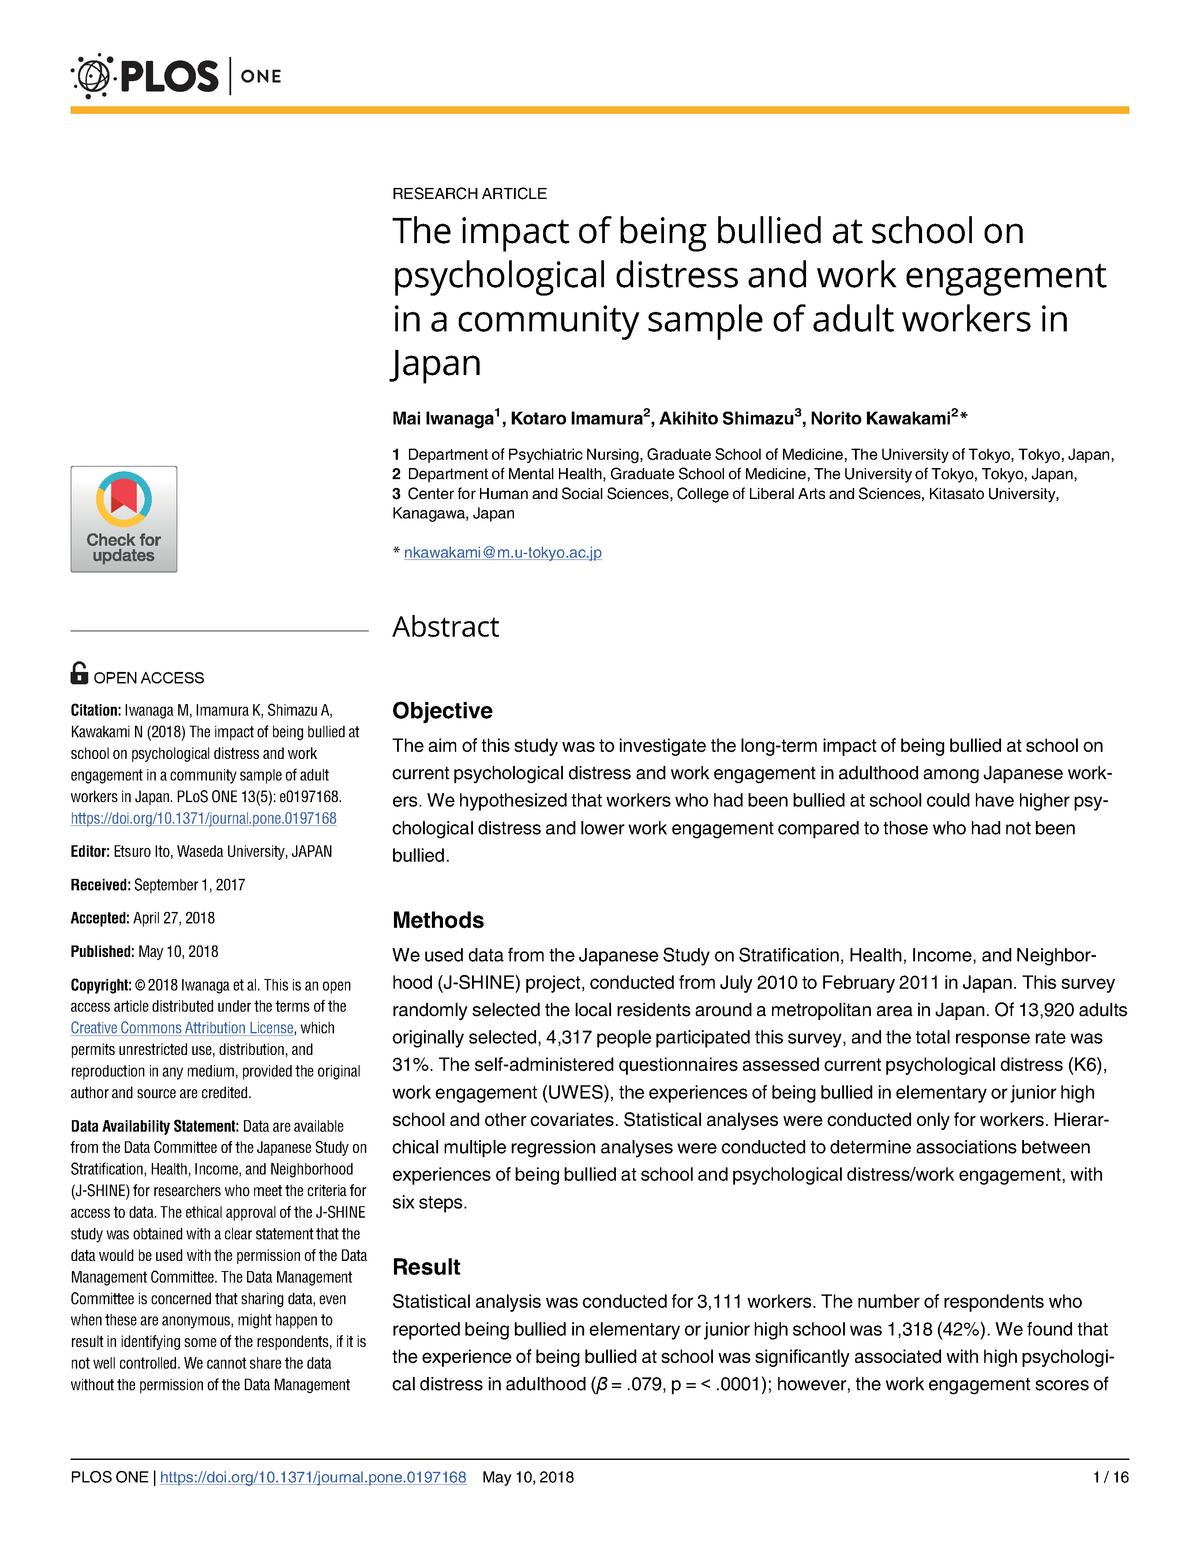 quantitative research paper about bullying pdf in the philippines